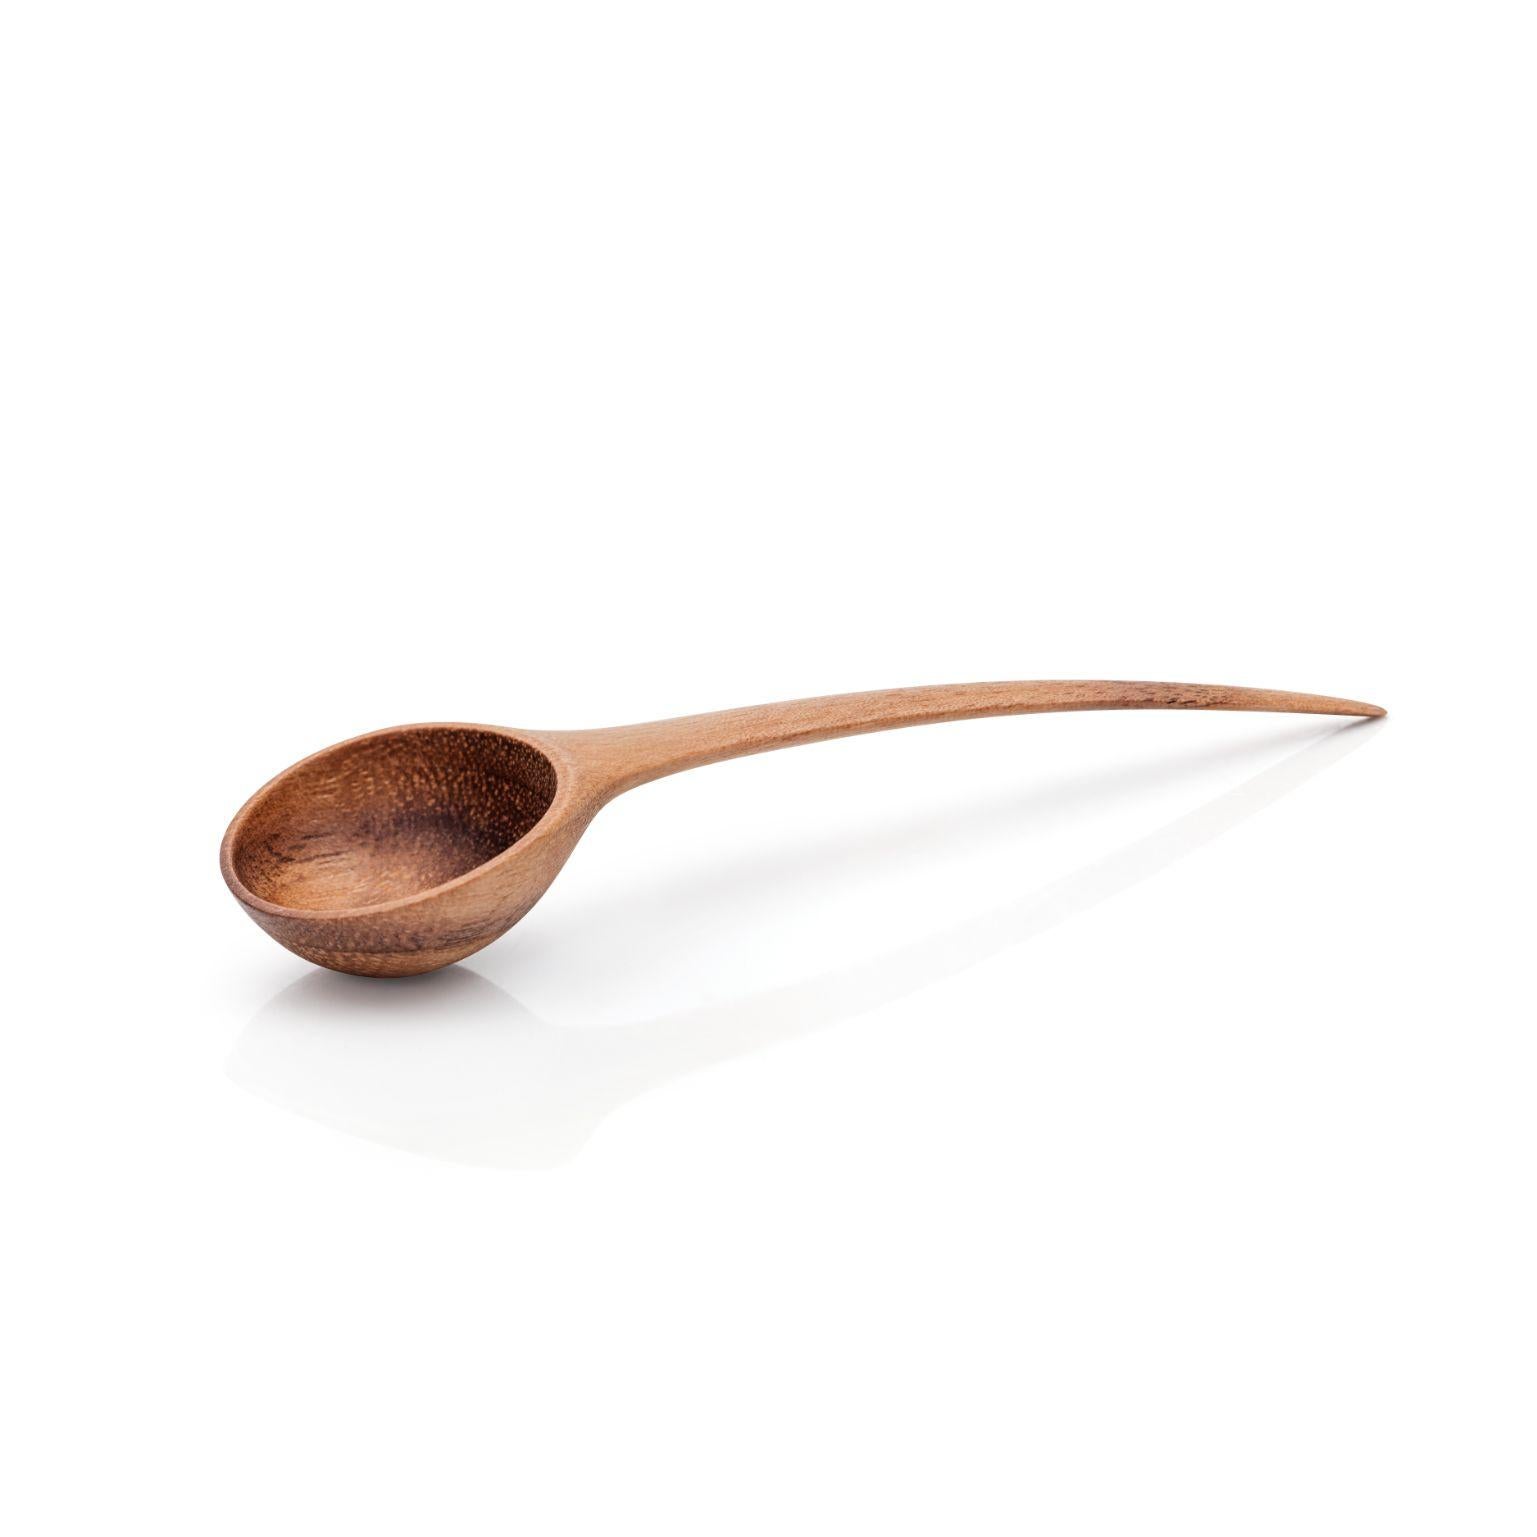 Pisara spoon - Medium by Antrei Hartikainen
Materials: Walnut, maple, natural oil wax
Dimensions: W 7-10 cm

Also available in three sizes and a variety of woods.

This range of small spoons are ideal for serving sugar, salt and other